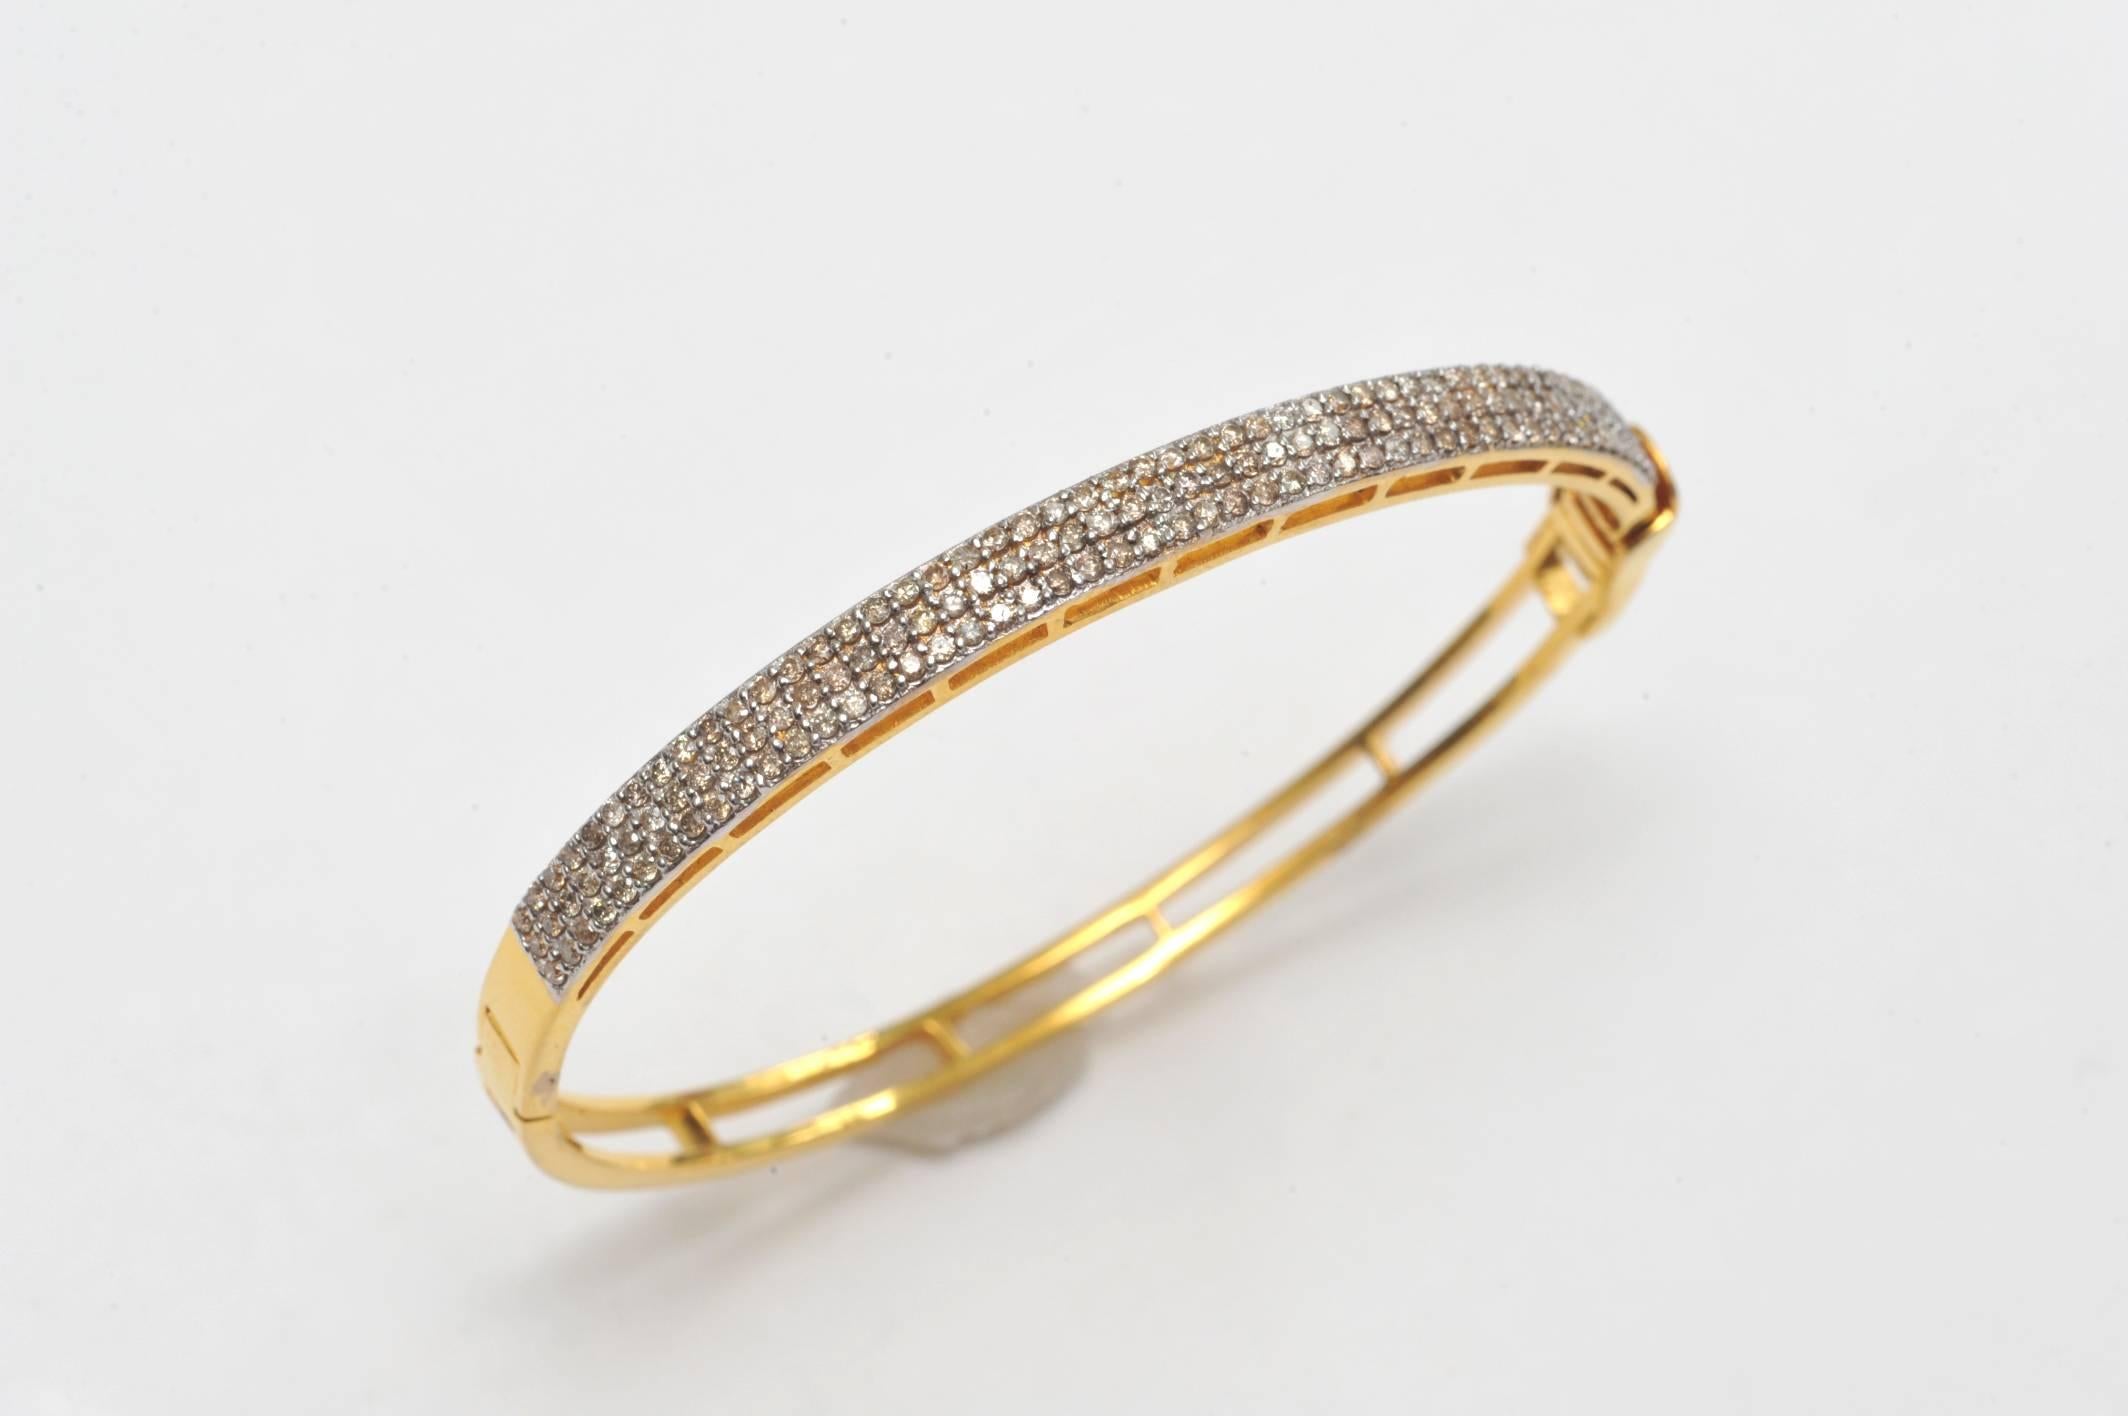 Lovely, triple-row of pave`-set diamonds set in 22K gold.  Oval shape ensures the stones stay on top of the wrist.  Carat weight of diamonds is 1.54.  Simple and elegant.  Inside circumference is 6.25 inches.  Hinged with locking push clasp.